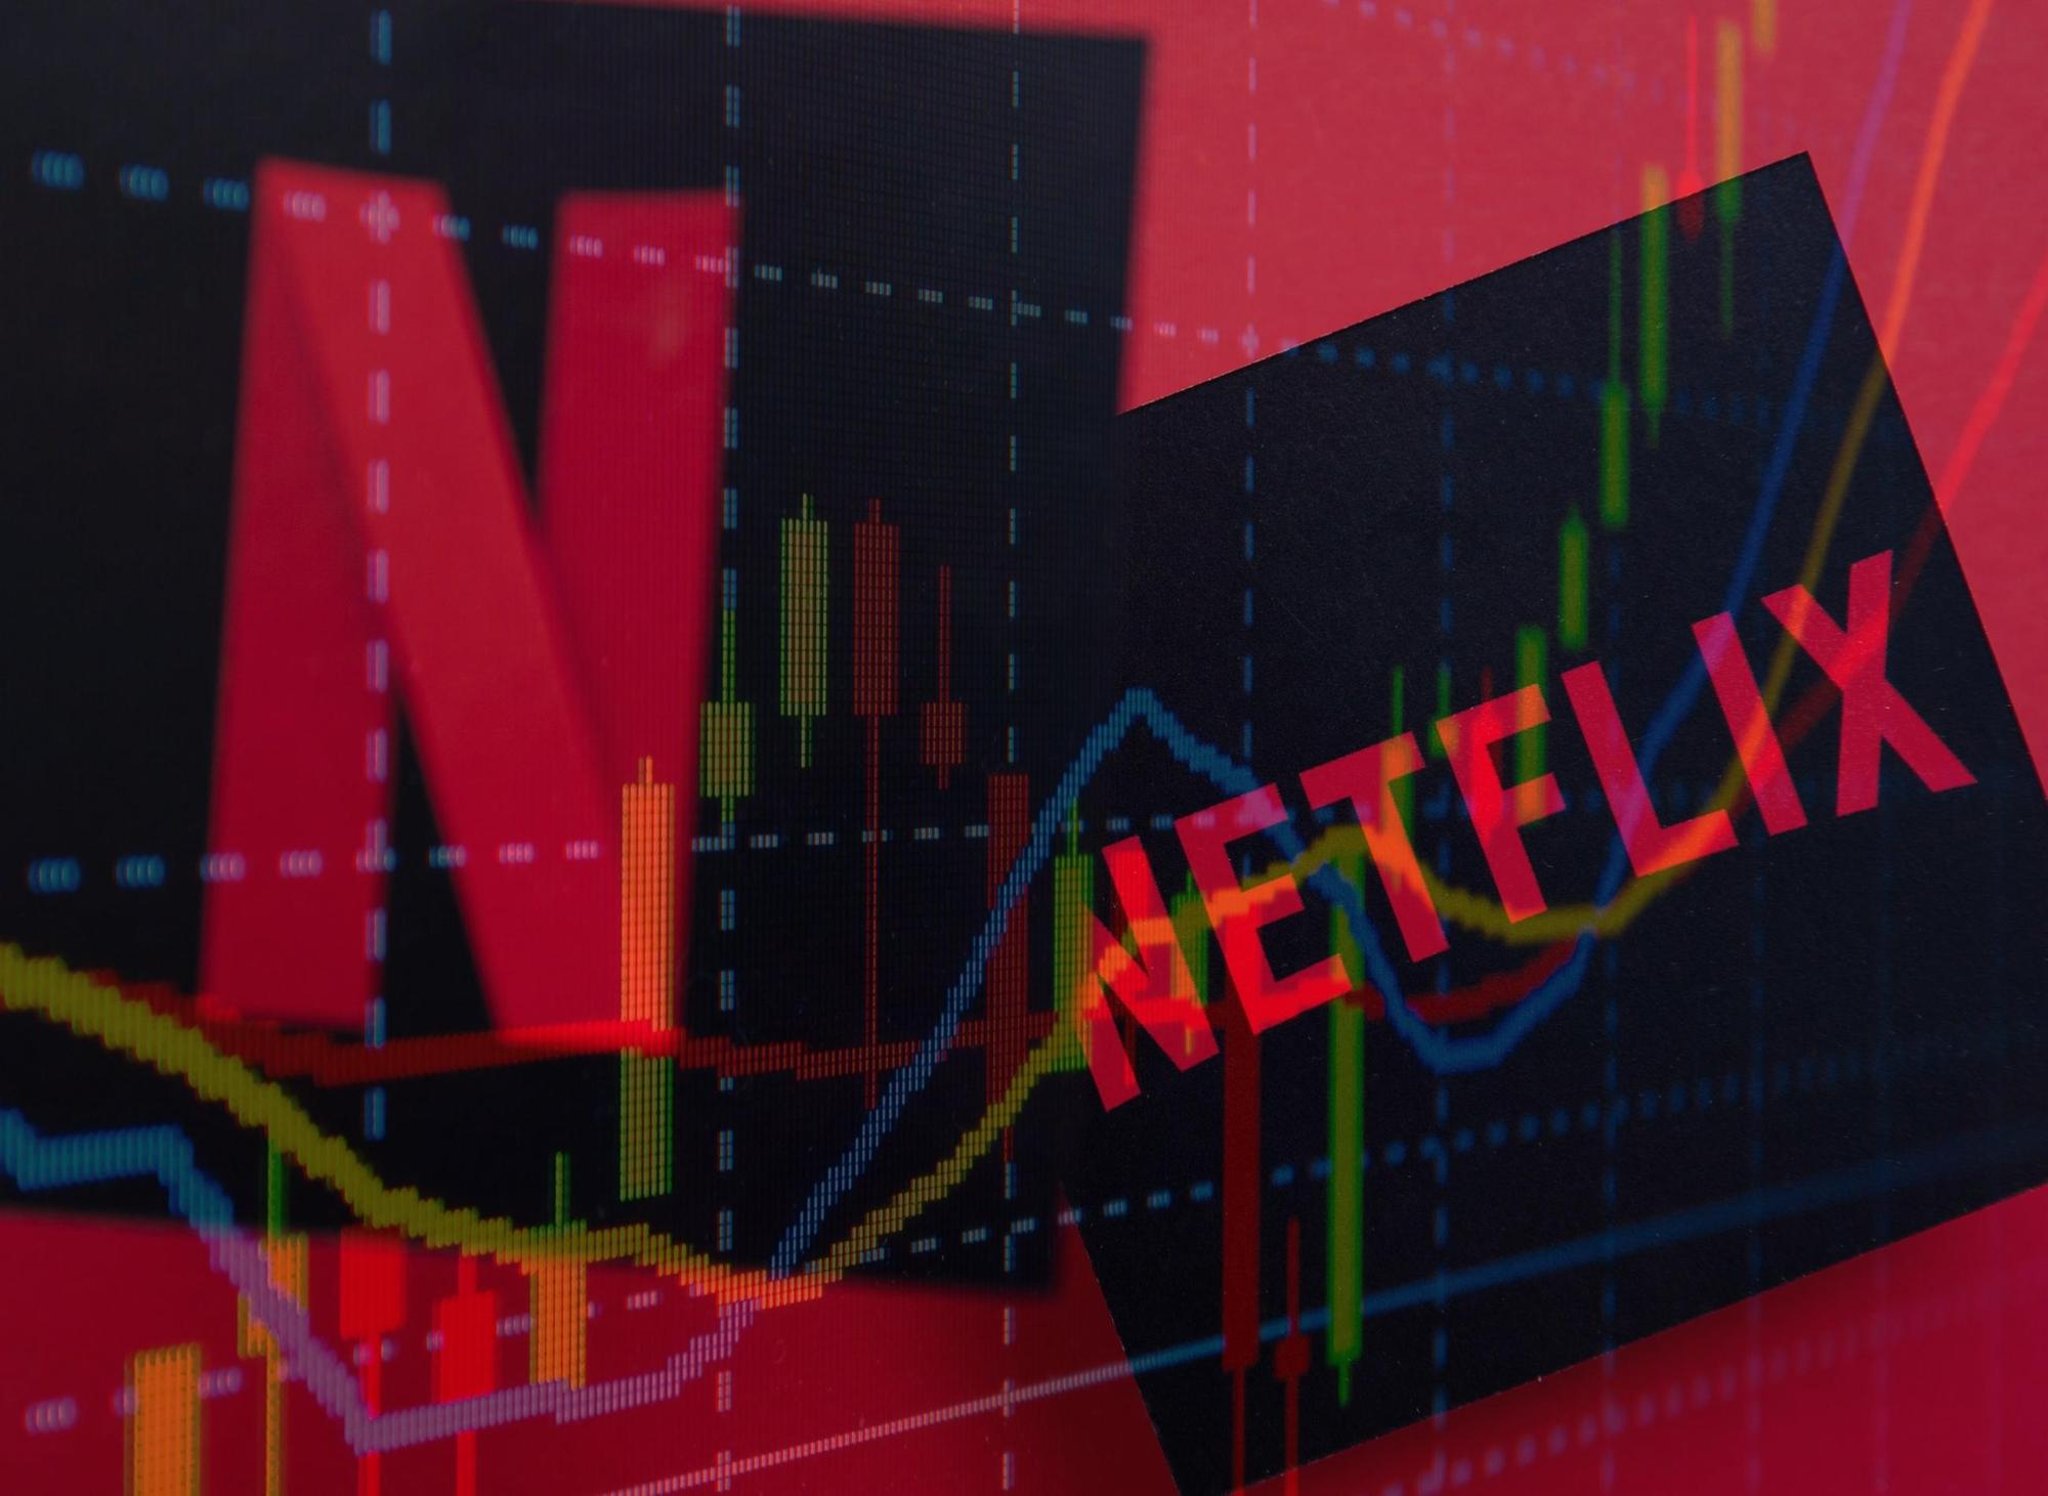 #Netflix Stops Animation Efforts, Fires Executives, And Cancels Several Highly Anticipated Shows Admist Highly Publicized Subscriber Loss! » OmniGeekEmpire